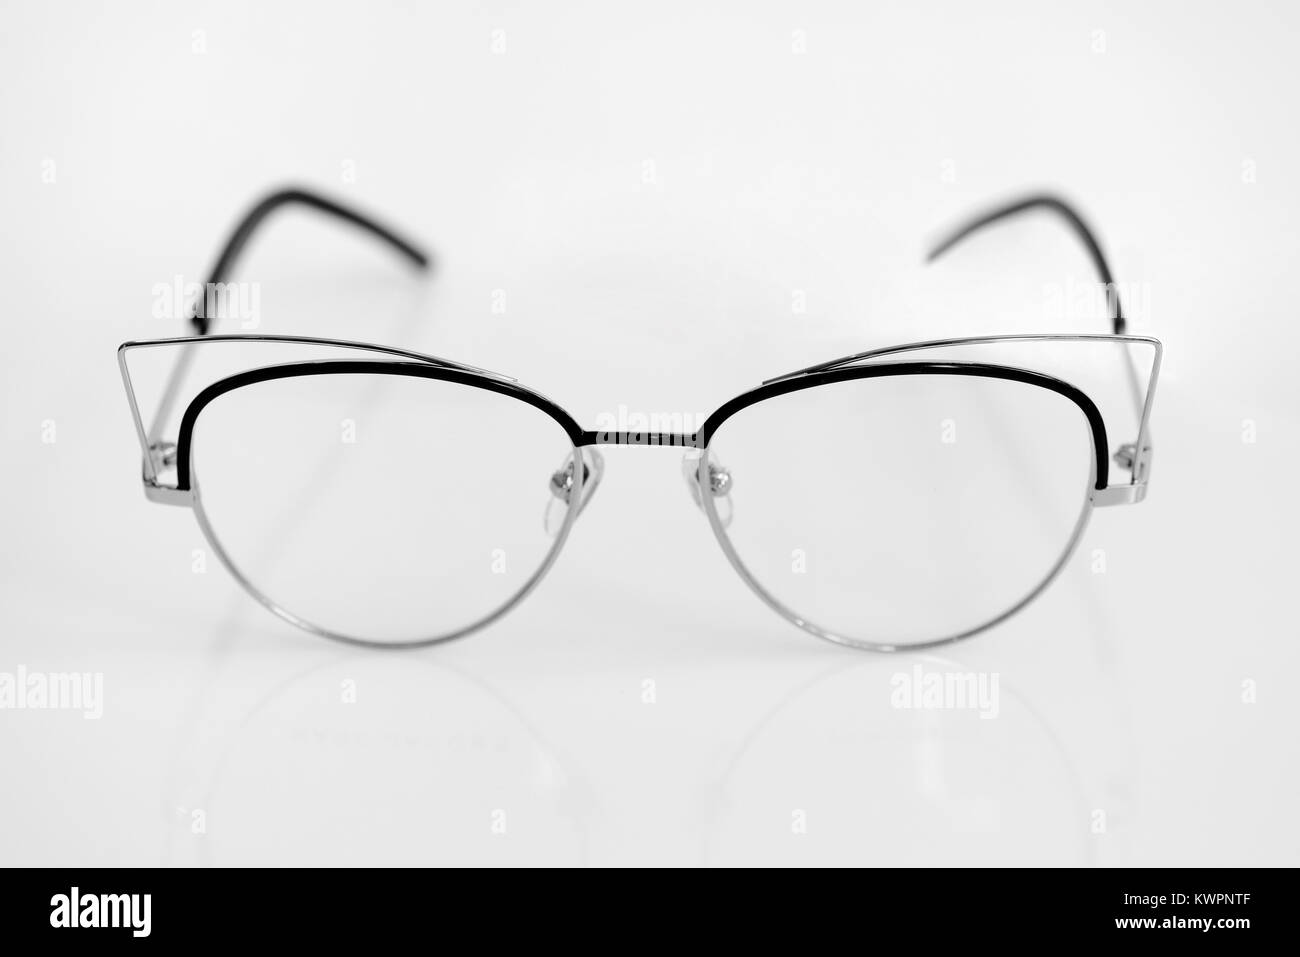 Eye glasses with clear lenses on the white background Stock Photo